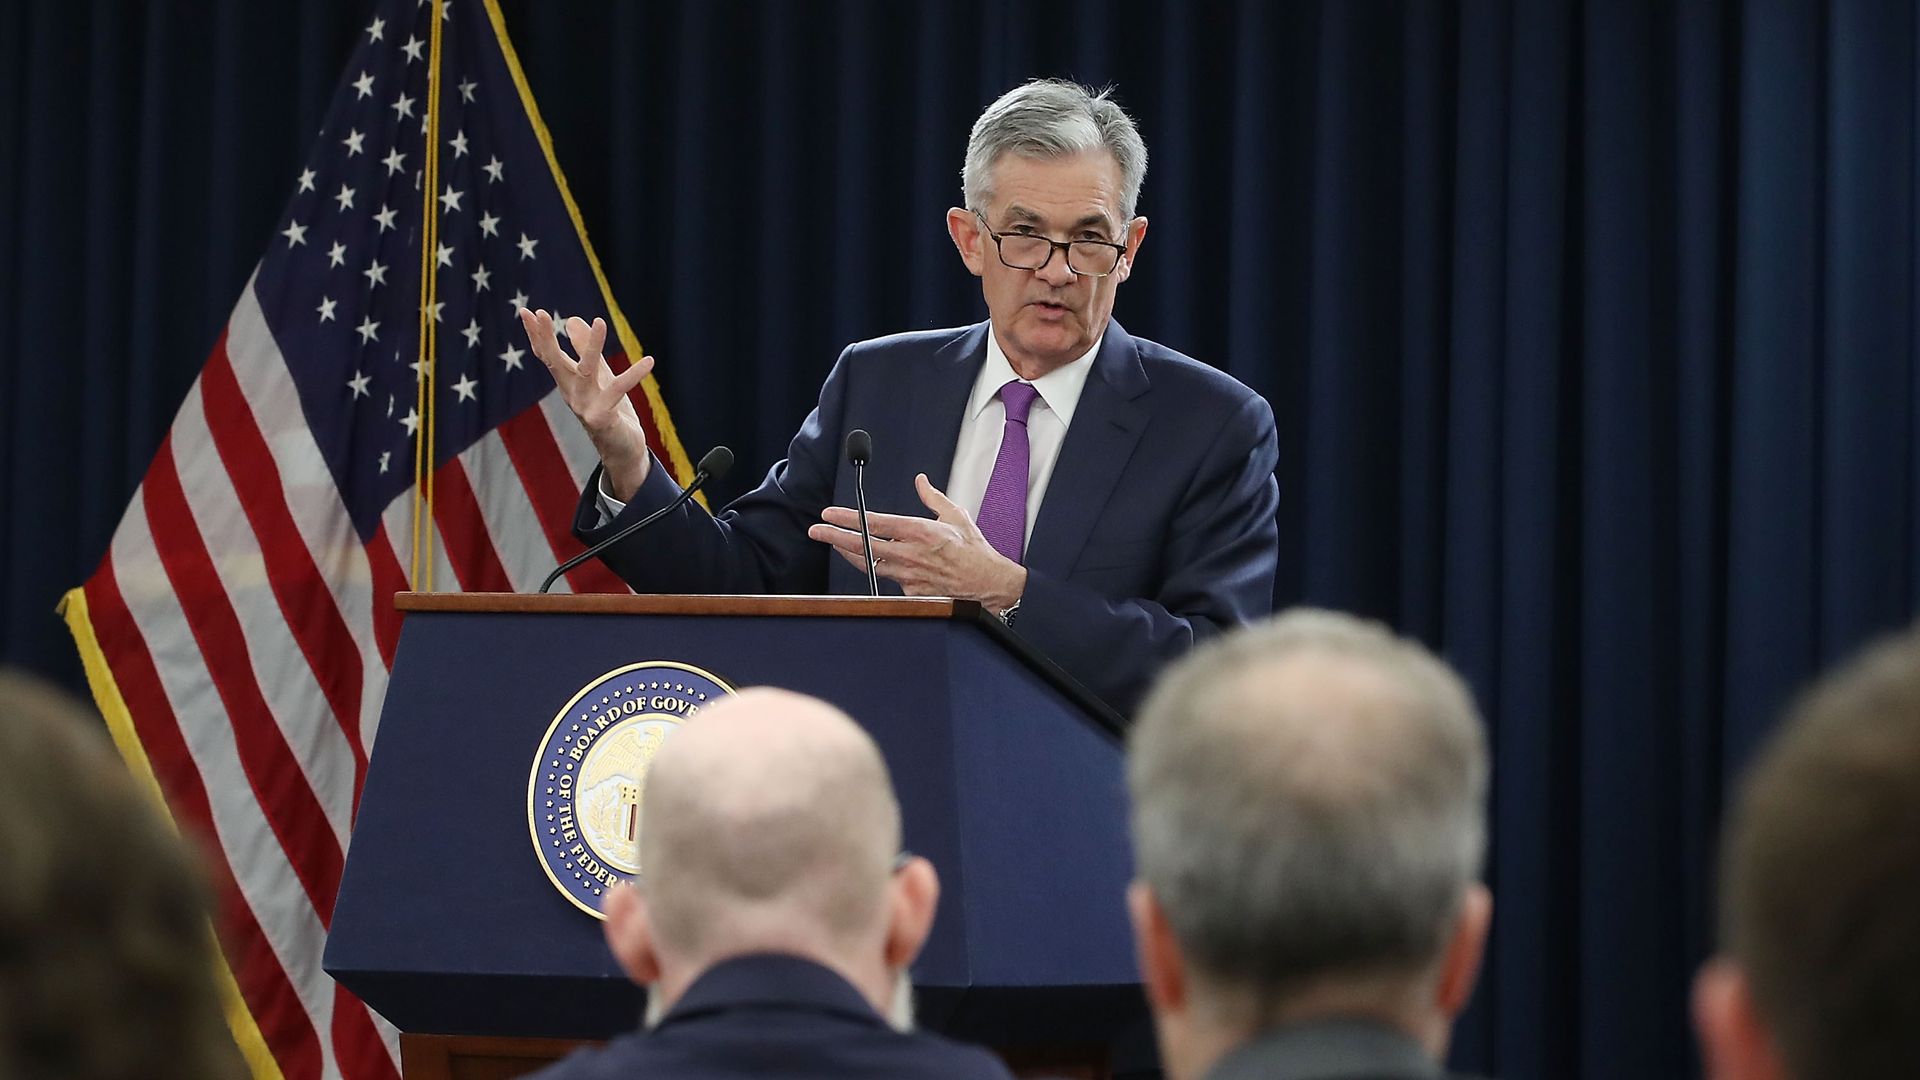 WASHINGTON, DC - SEPTEMBER 26: Federal Reserve Board Chairman Jerome Powell speaks during a news conference on September 26, 2018